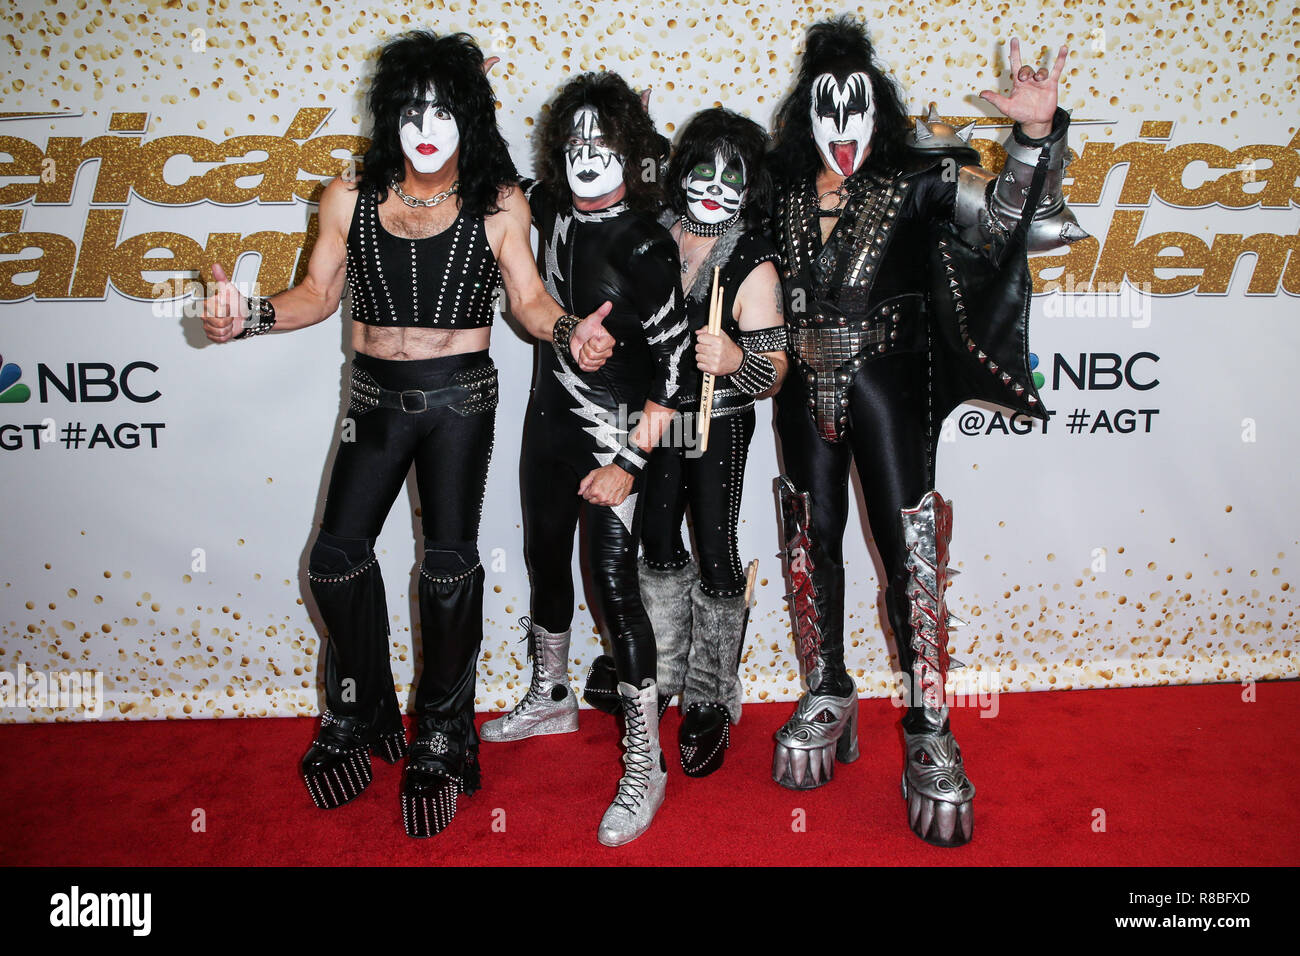 HOLLYWOOD, LOS ANGELES, CA, USA - SEPTEMBER 19: Paul Stanley, Tommy Thayer, Eric Singer, Gene Simmons, Kiss at the 'America's Got Talent' Season 13 Finale Live Show Red Carpet held at Dolby Theatre on September 19, 2018 in Hollywood, Los Angeles, California, United States. (Photo by Image Press Agency) Stock Photo